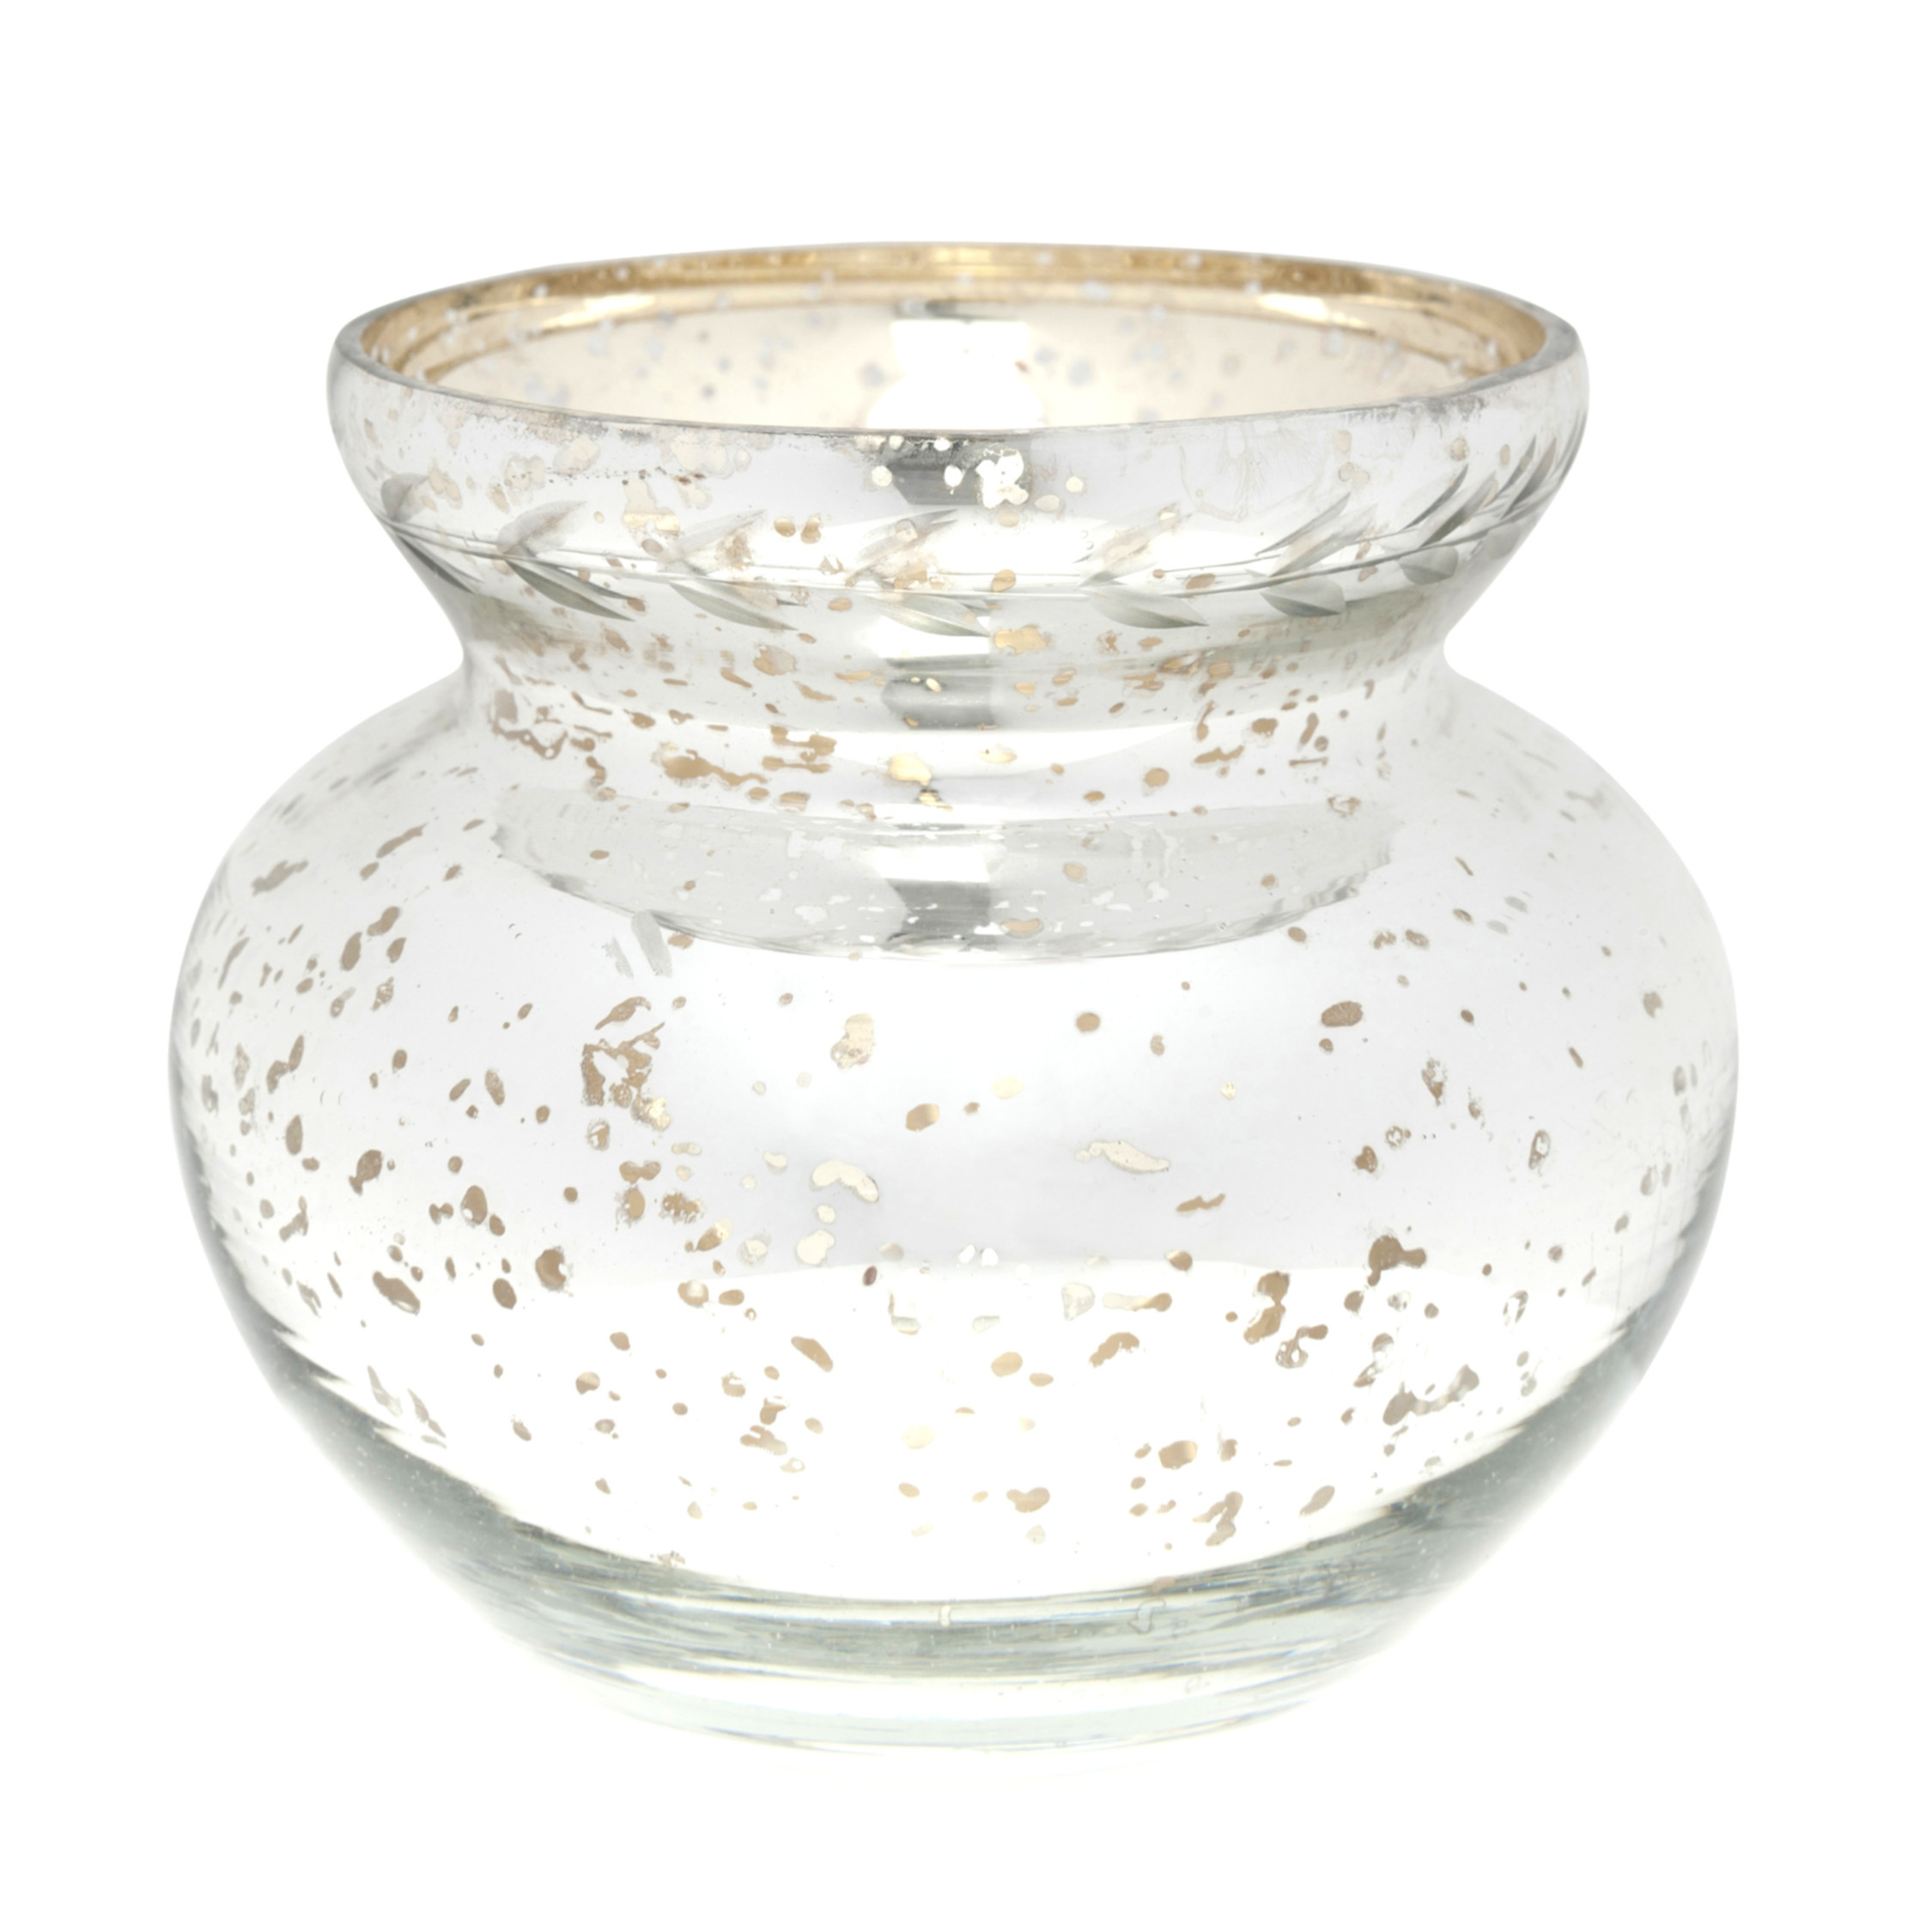 26 Recommended Mercury Glass Pedestal Vase 2024 free download mercury glass pedestal vase of the biggest contribution of silver glass vase to humanity silver regarding www limetreehomeinteriors co uk sophie allport leaf etching glass